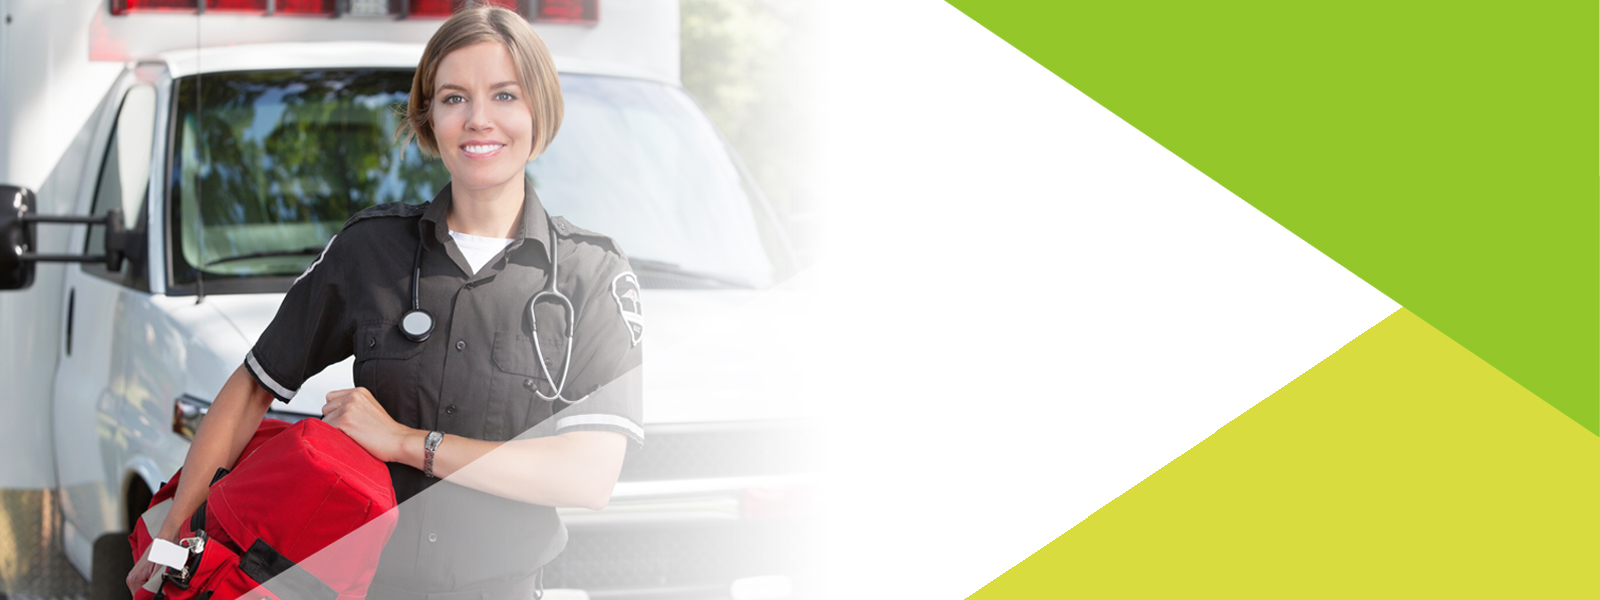 Medicount - EMS and ambulance billing software services